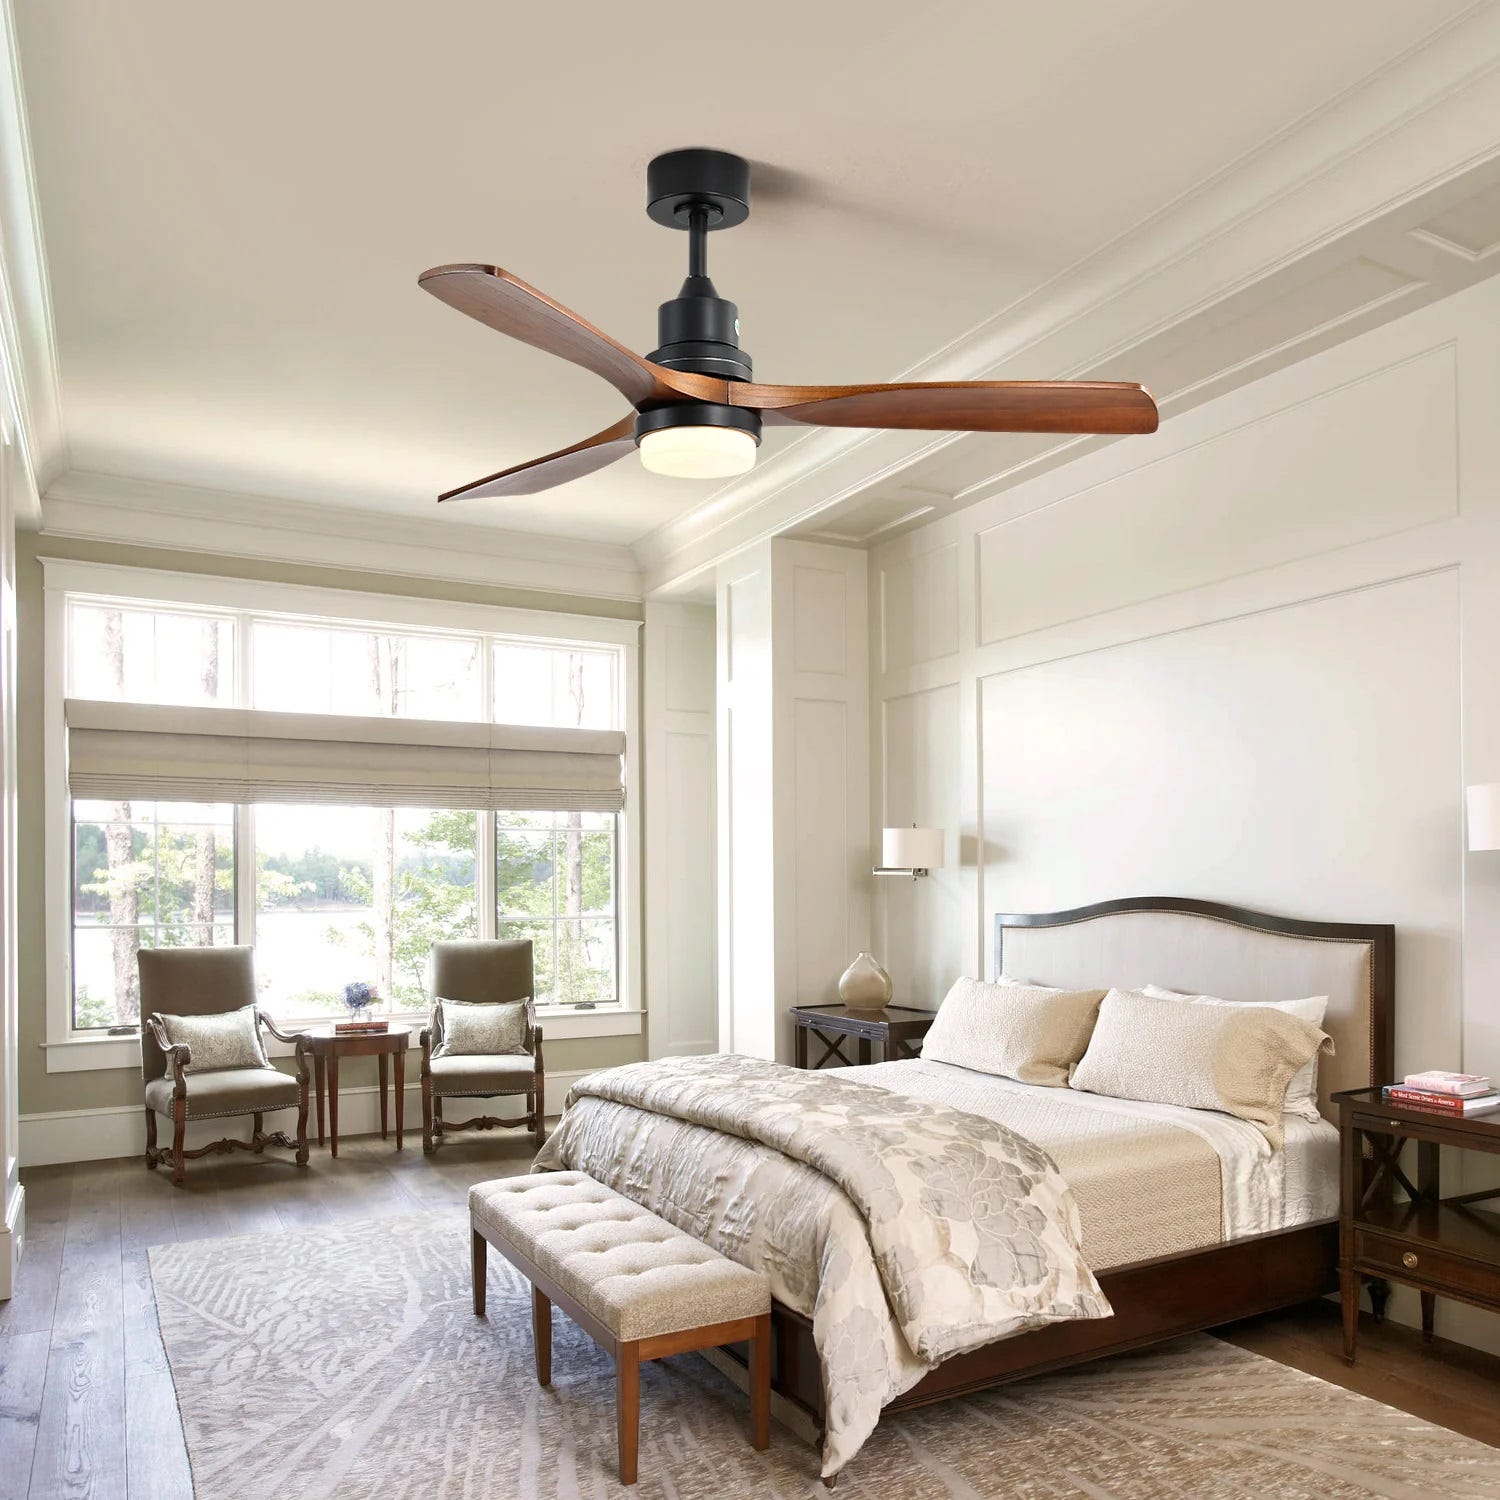 A ceiling fan with light, wooden blades and a dark finish, above a bedroom set with a bed, bench, and two armchairs.